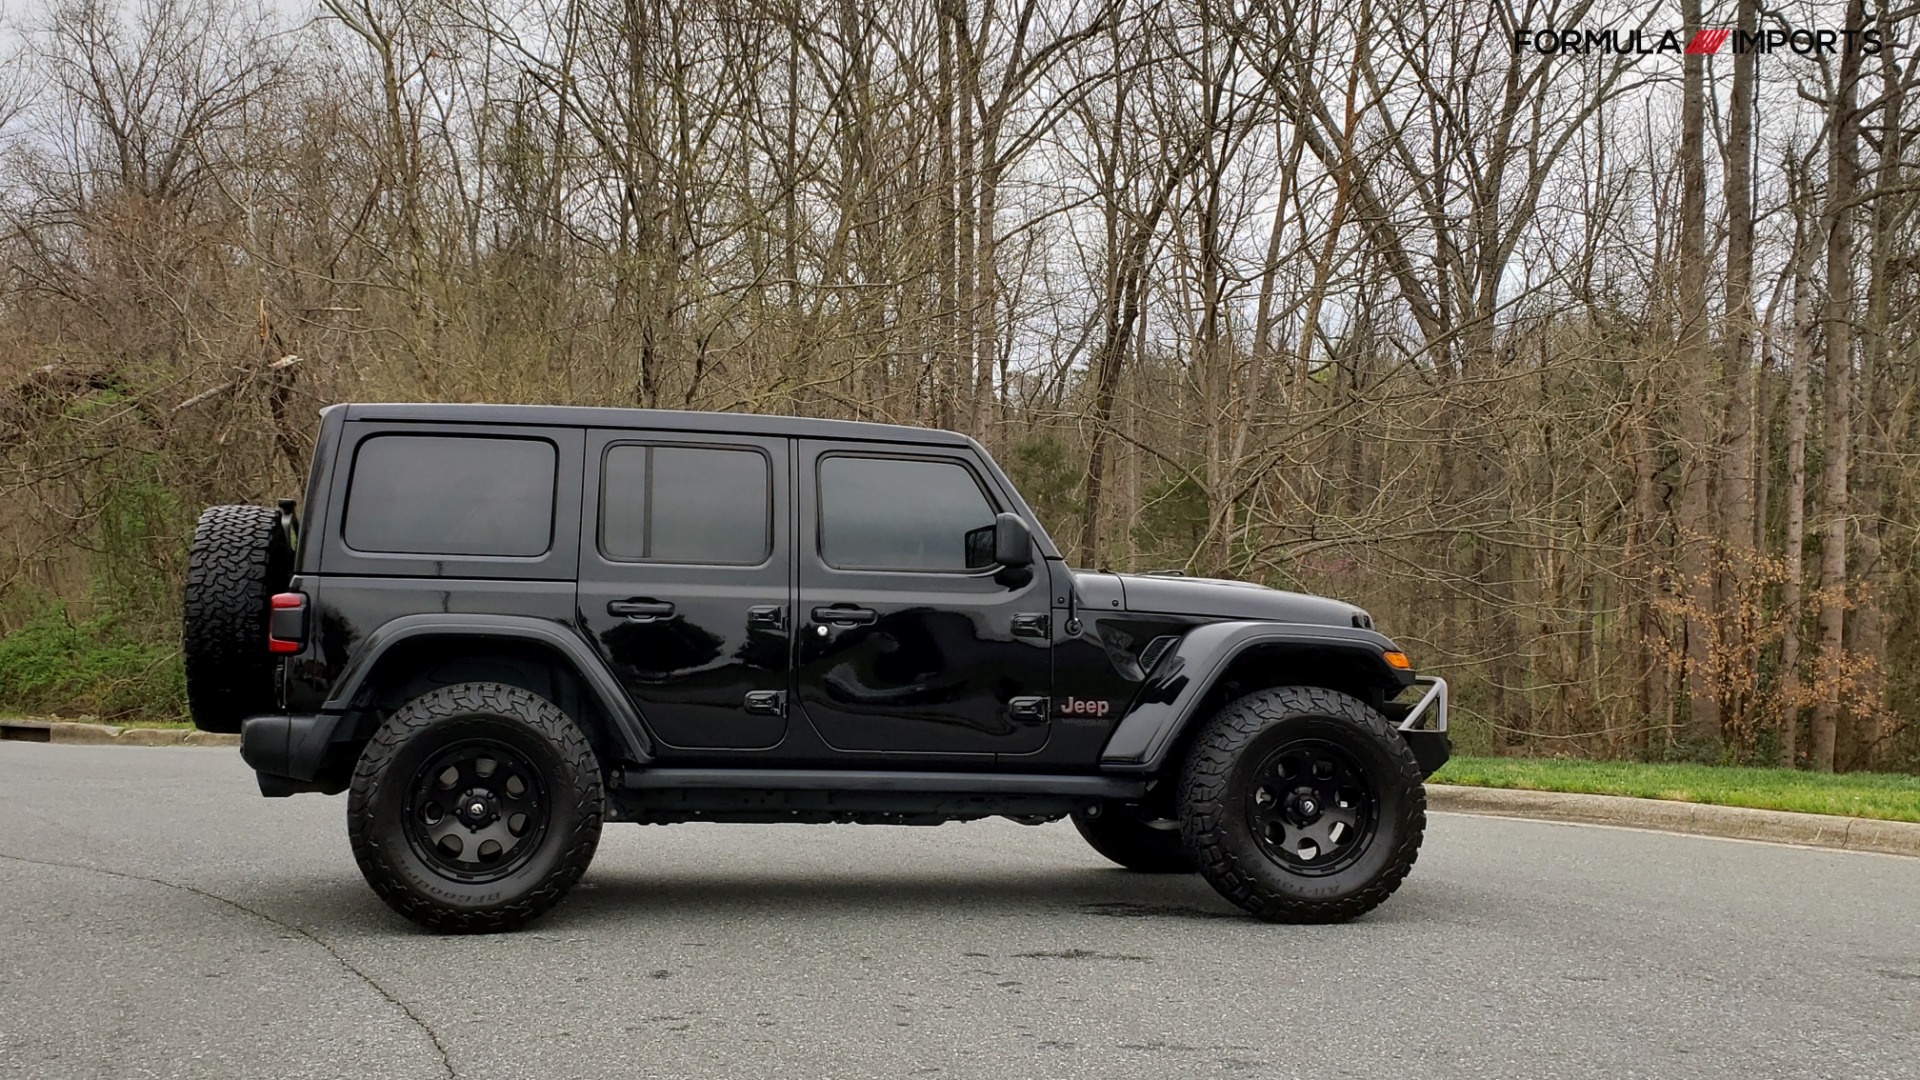 Used 2019 Jeep WRANGLER UNLIMITED RUBICON 4WD / V6 / 8-SPD AUTO / NAV / PWR TOP / REARVIEW for sale Sold at Formula Imports in Charlotte NC 28227 13